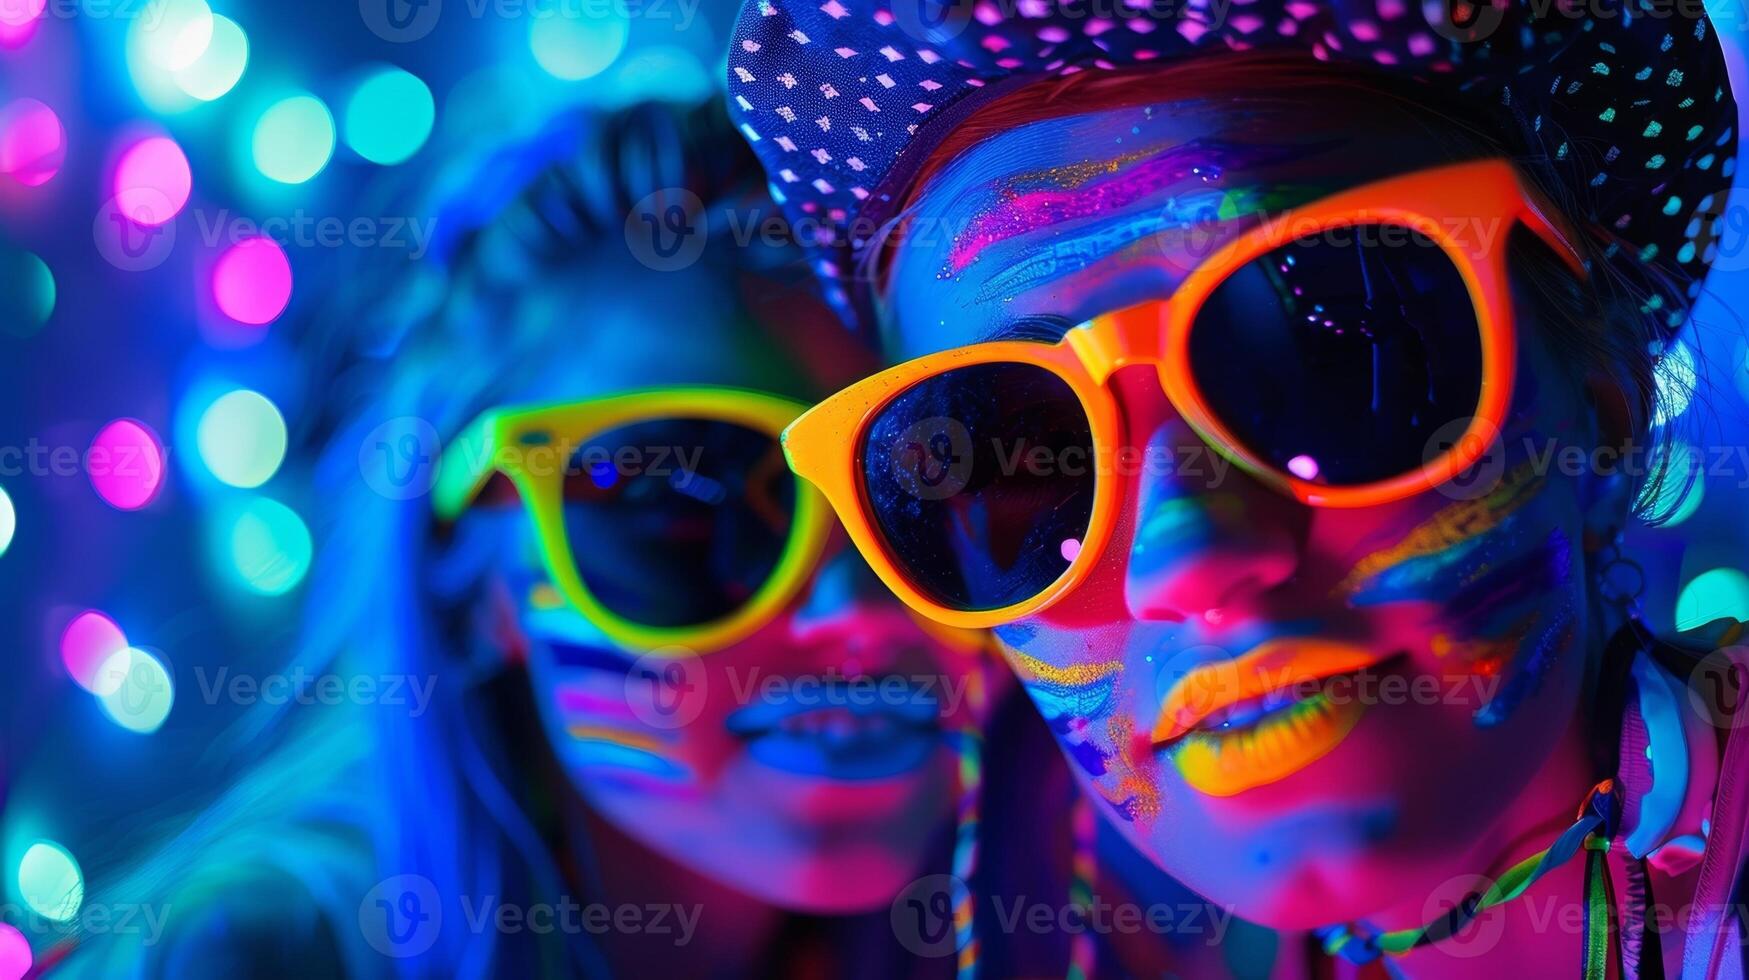 A photo booth with a blacklight backdrop perfect for capturing the glowing party outfits